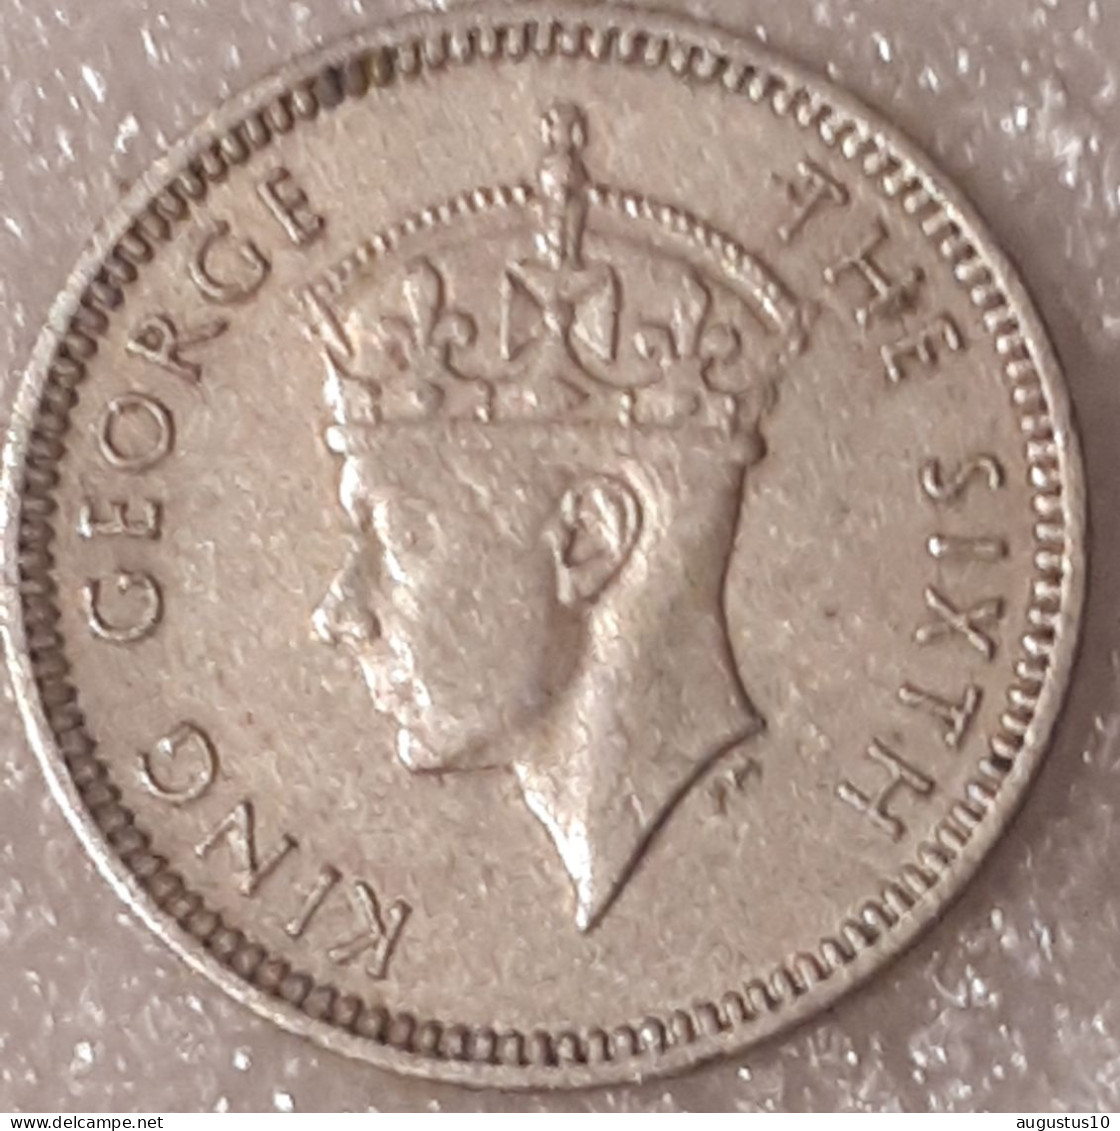 Southern Rhodesia: 3 PENCE 1952  RARE TYPE In Alm. UNC !! KM 20 - Rhodésie